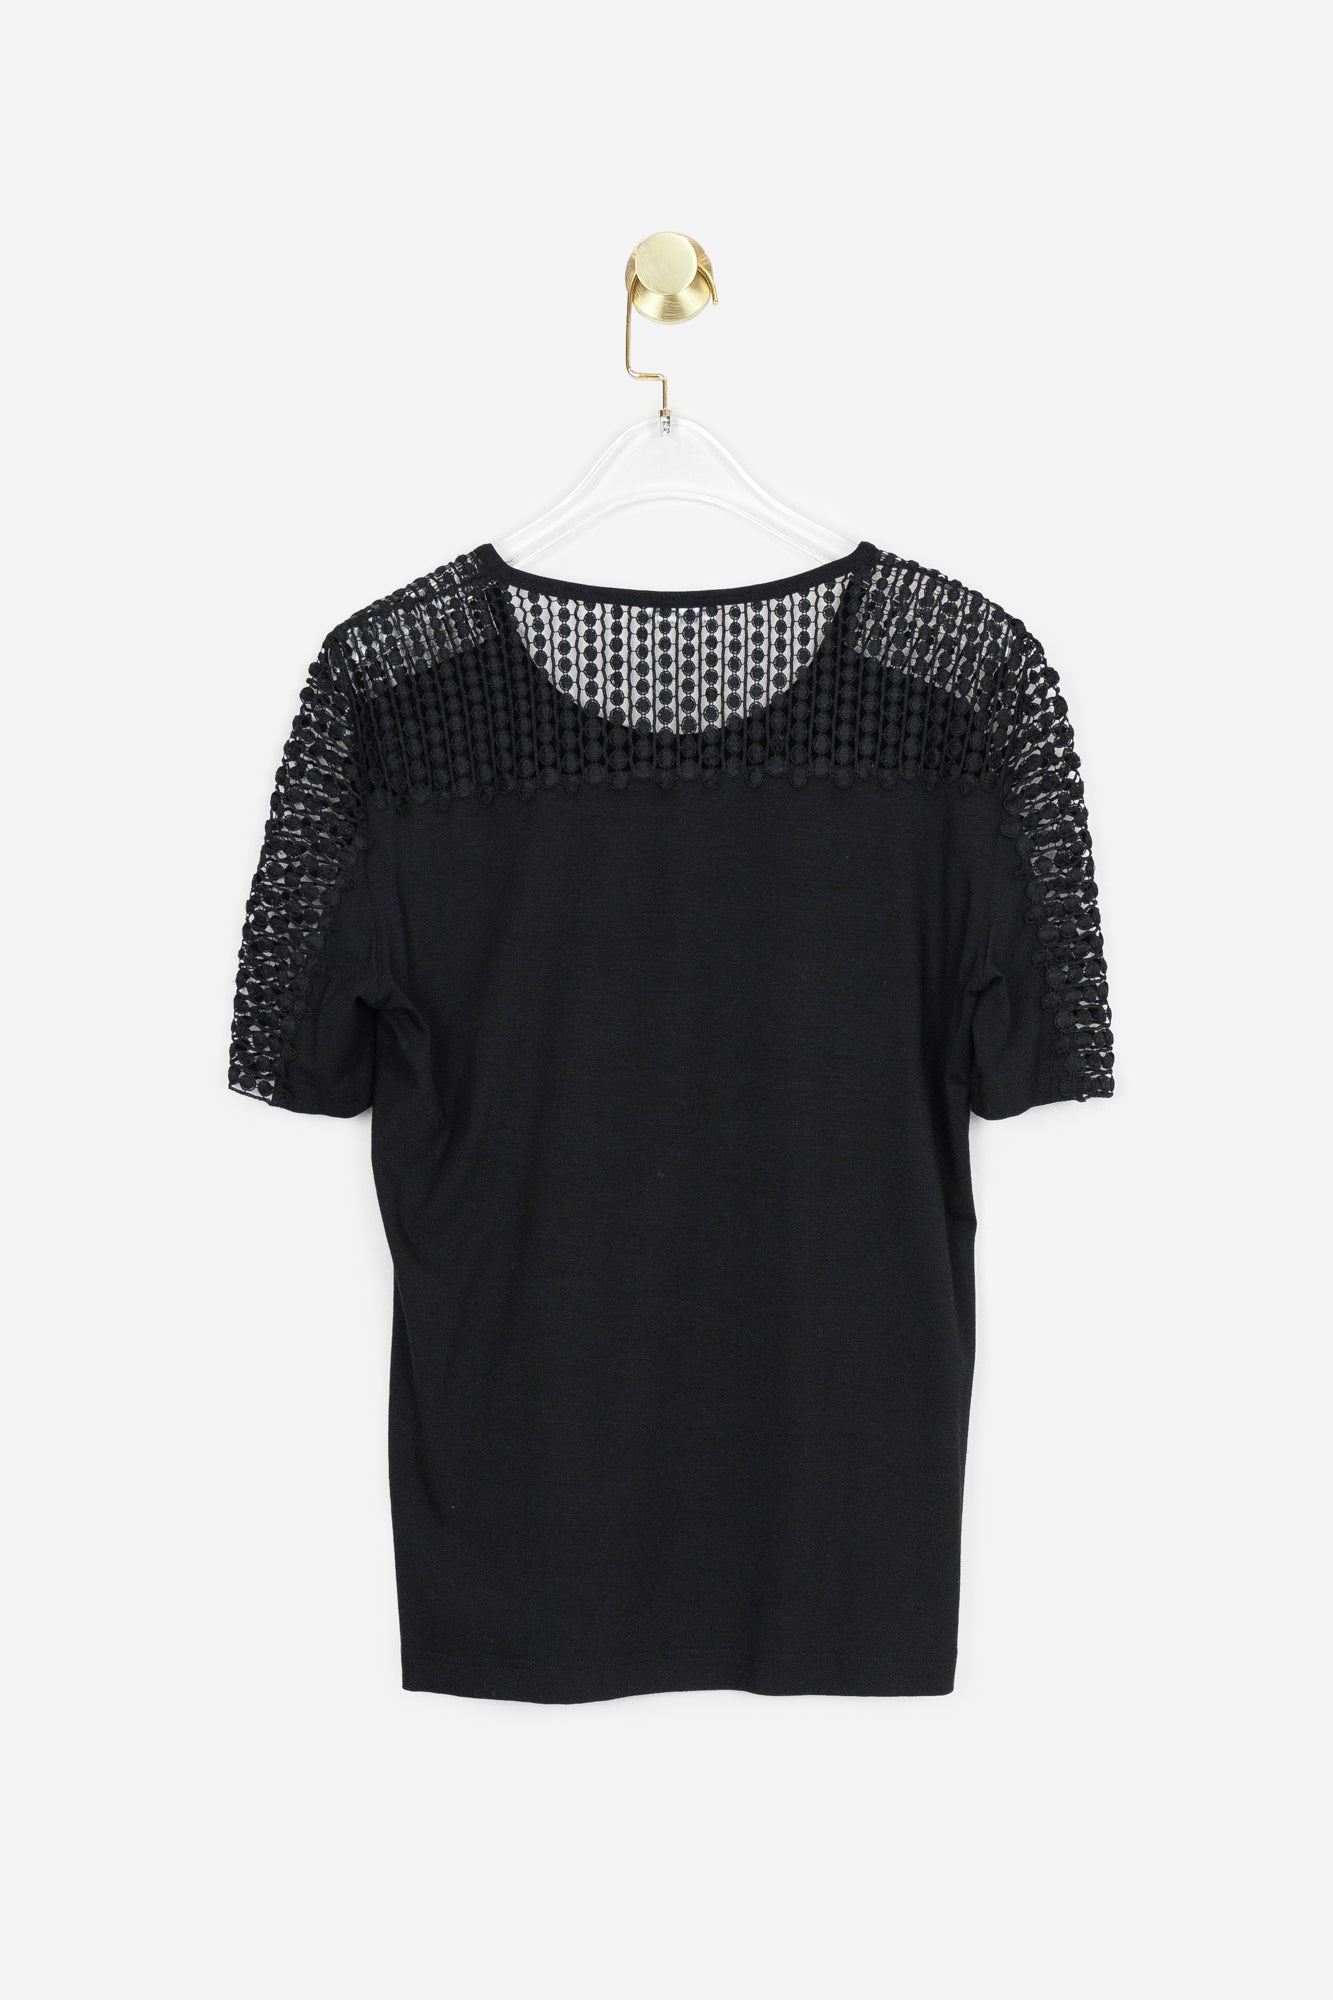 Black Shirt with Knitted Details - So Over It Luxury Consignment